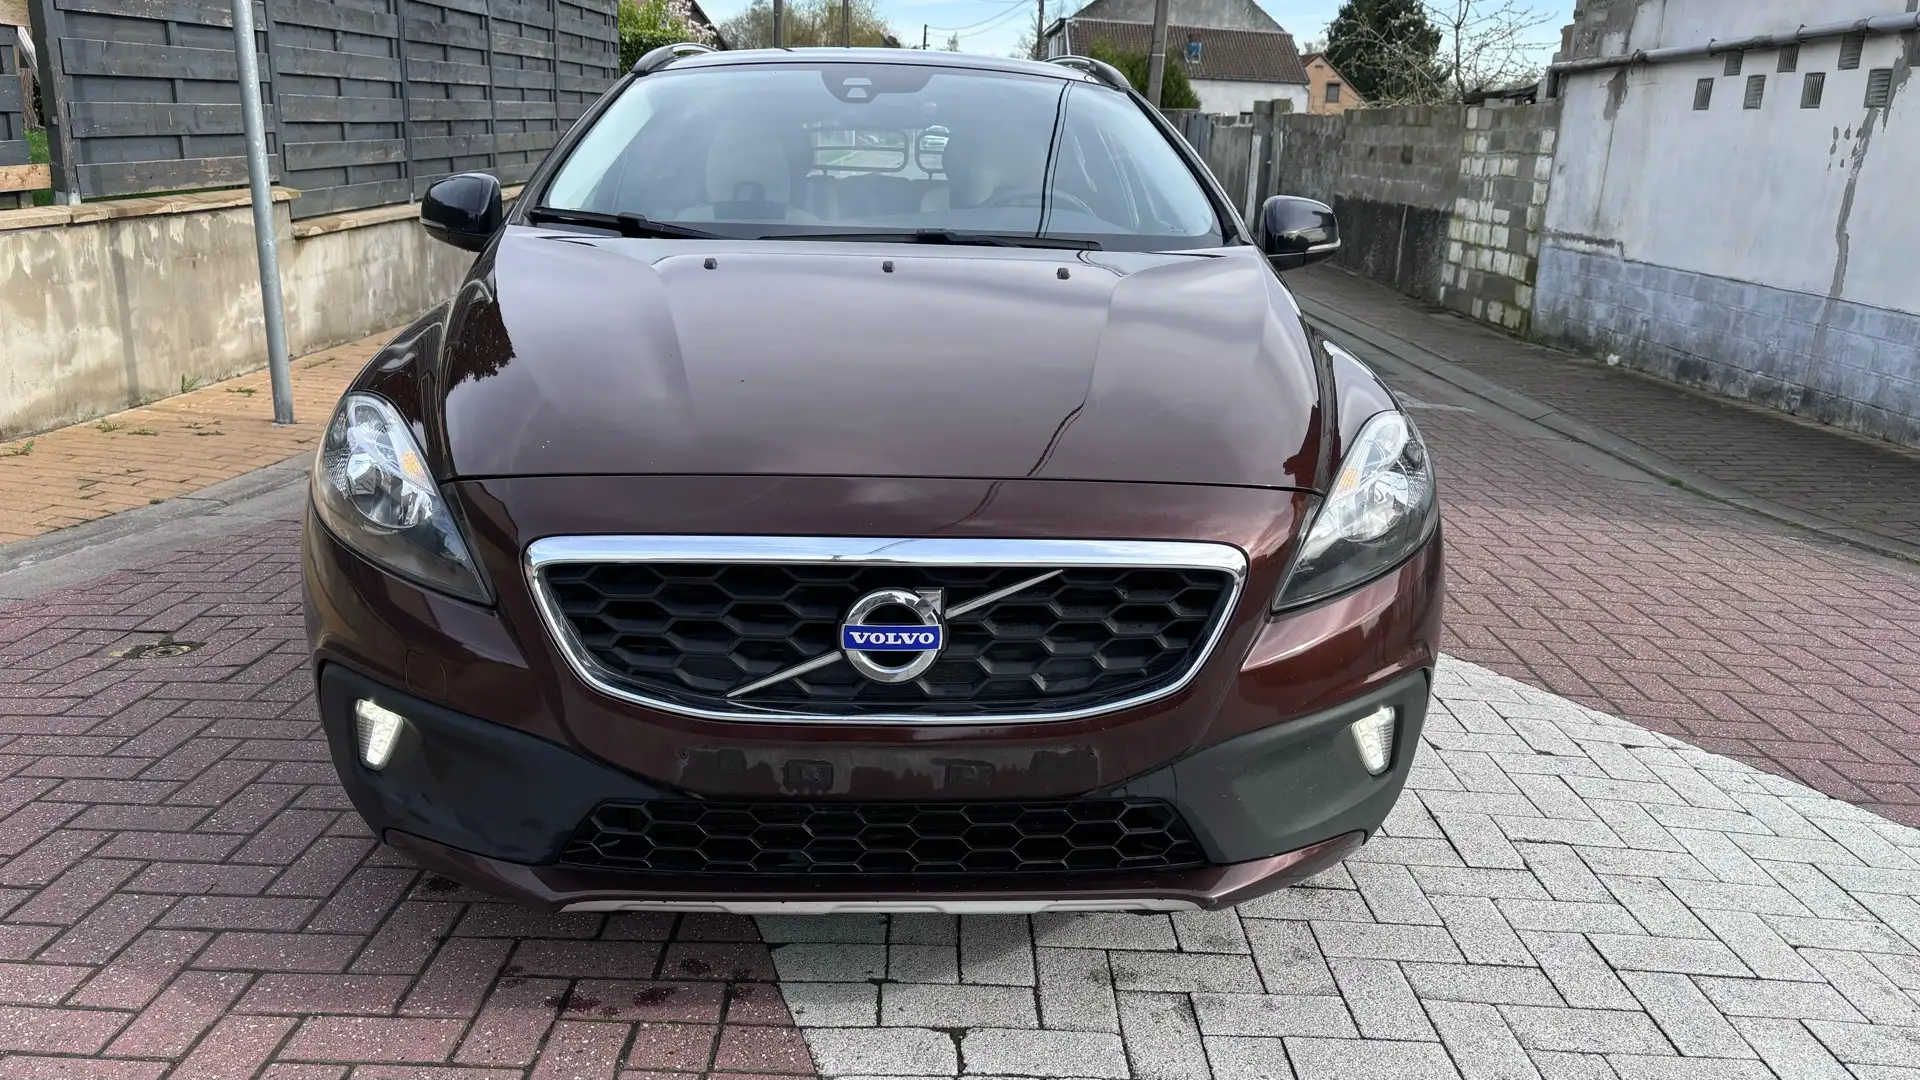 Volvo V40 Cross Country 2.0 D2/96gr/CUIR/GPS/PANO/LED EXPORT OU MARCHANDS Marrón - 2